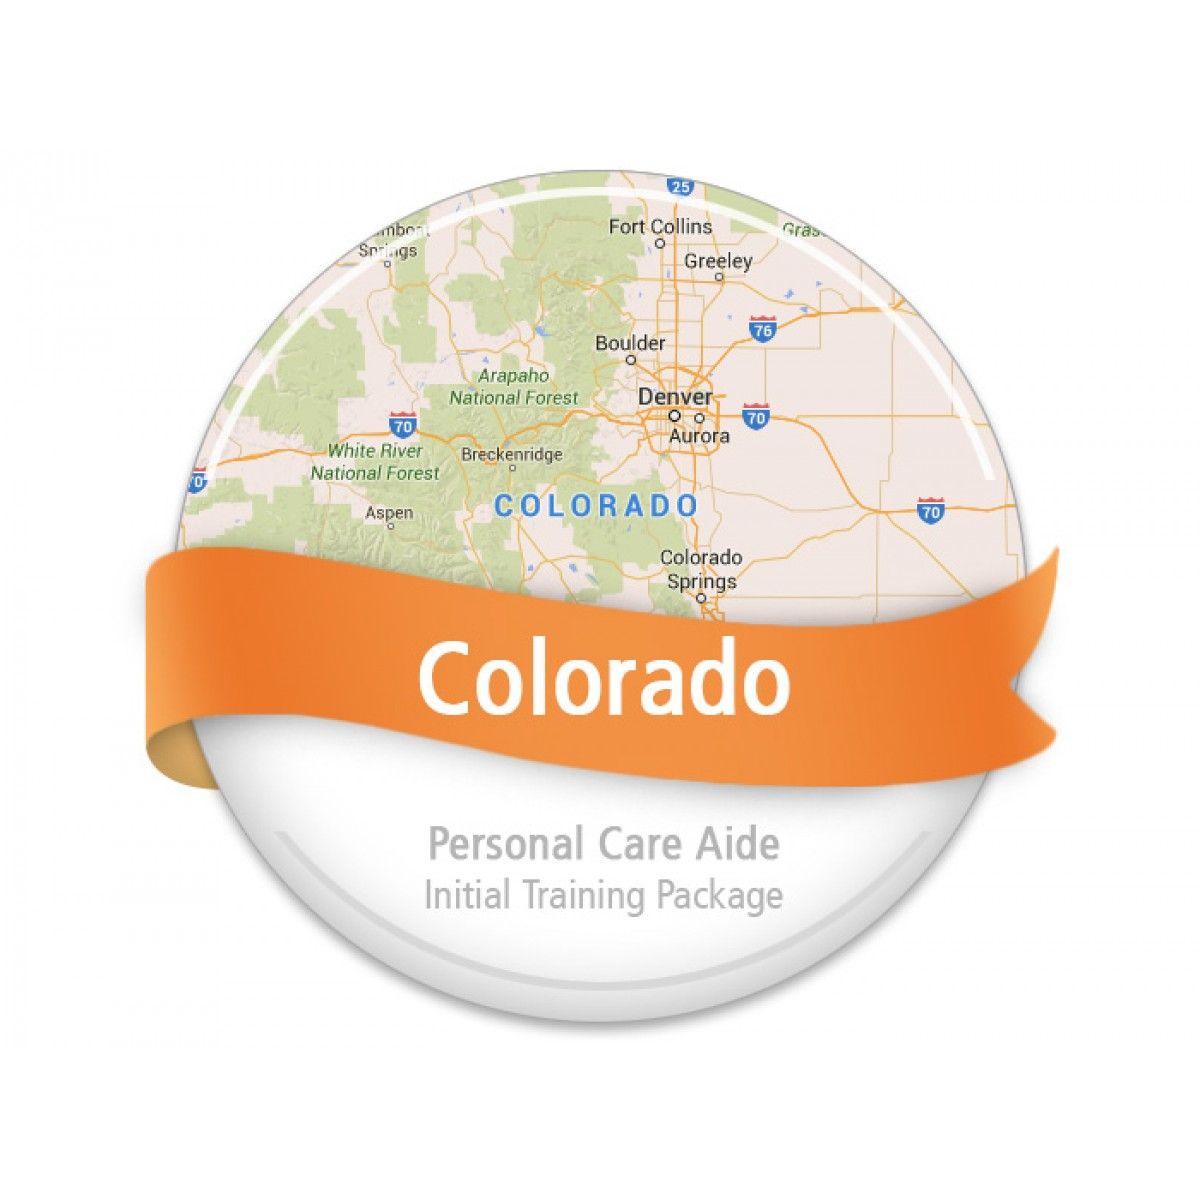 Personal Care Aide Logo - Colorado Personal Care Aide Initial Training Package | OnCourse ...